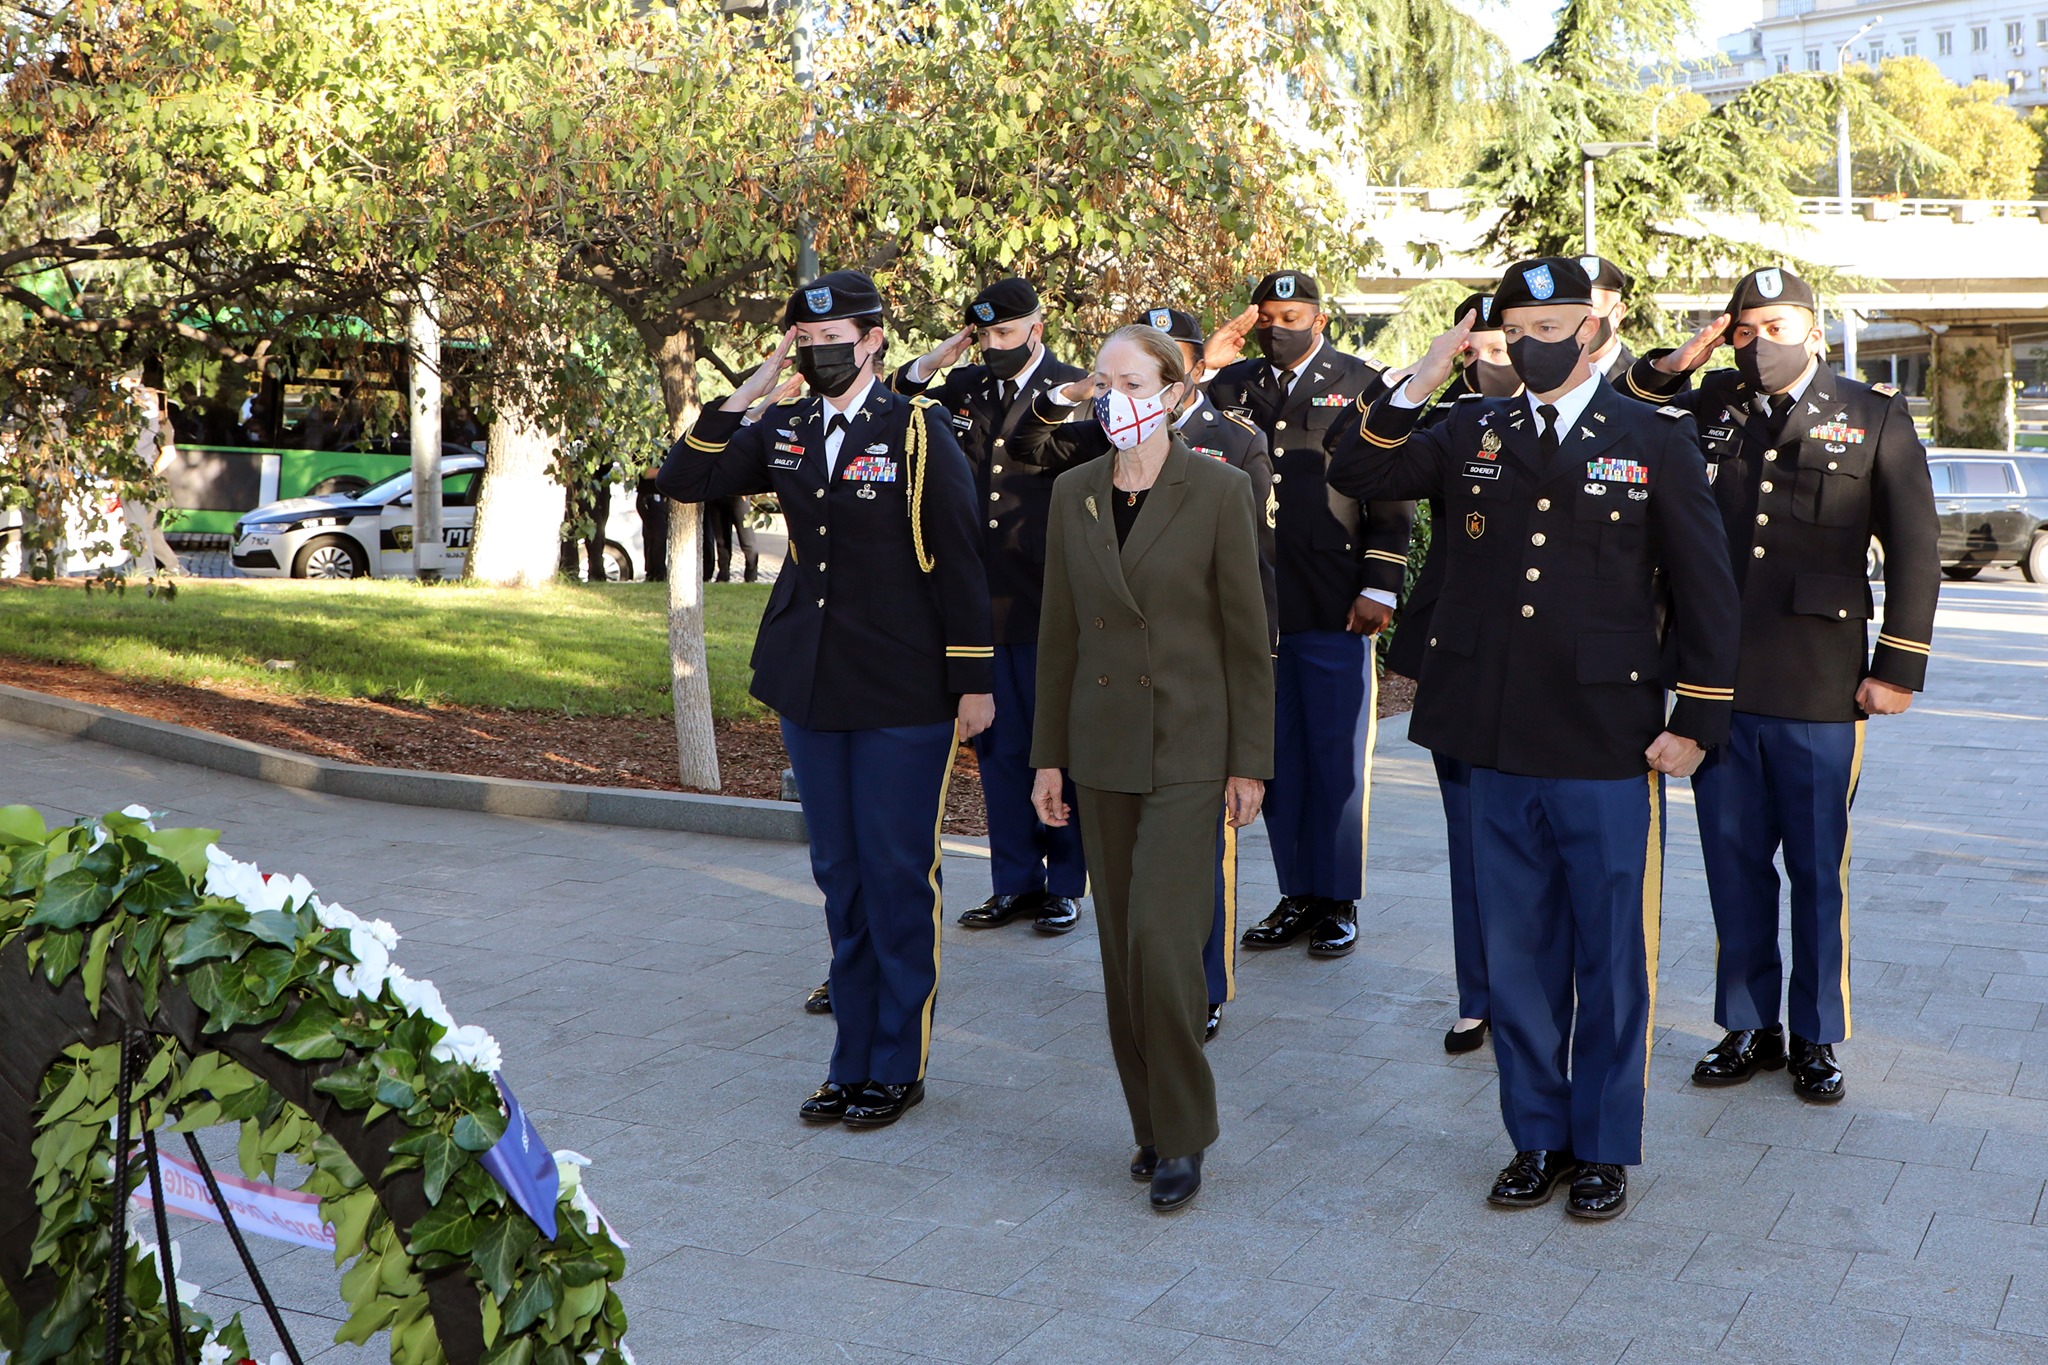 The US Ambassador laid a wreath at the Heroes' Memorial 